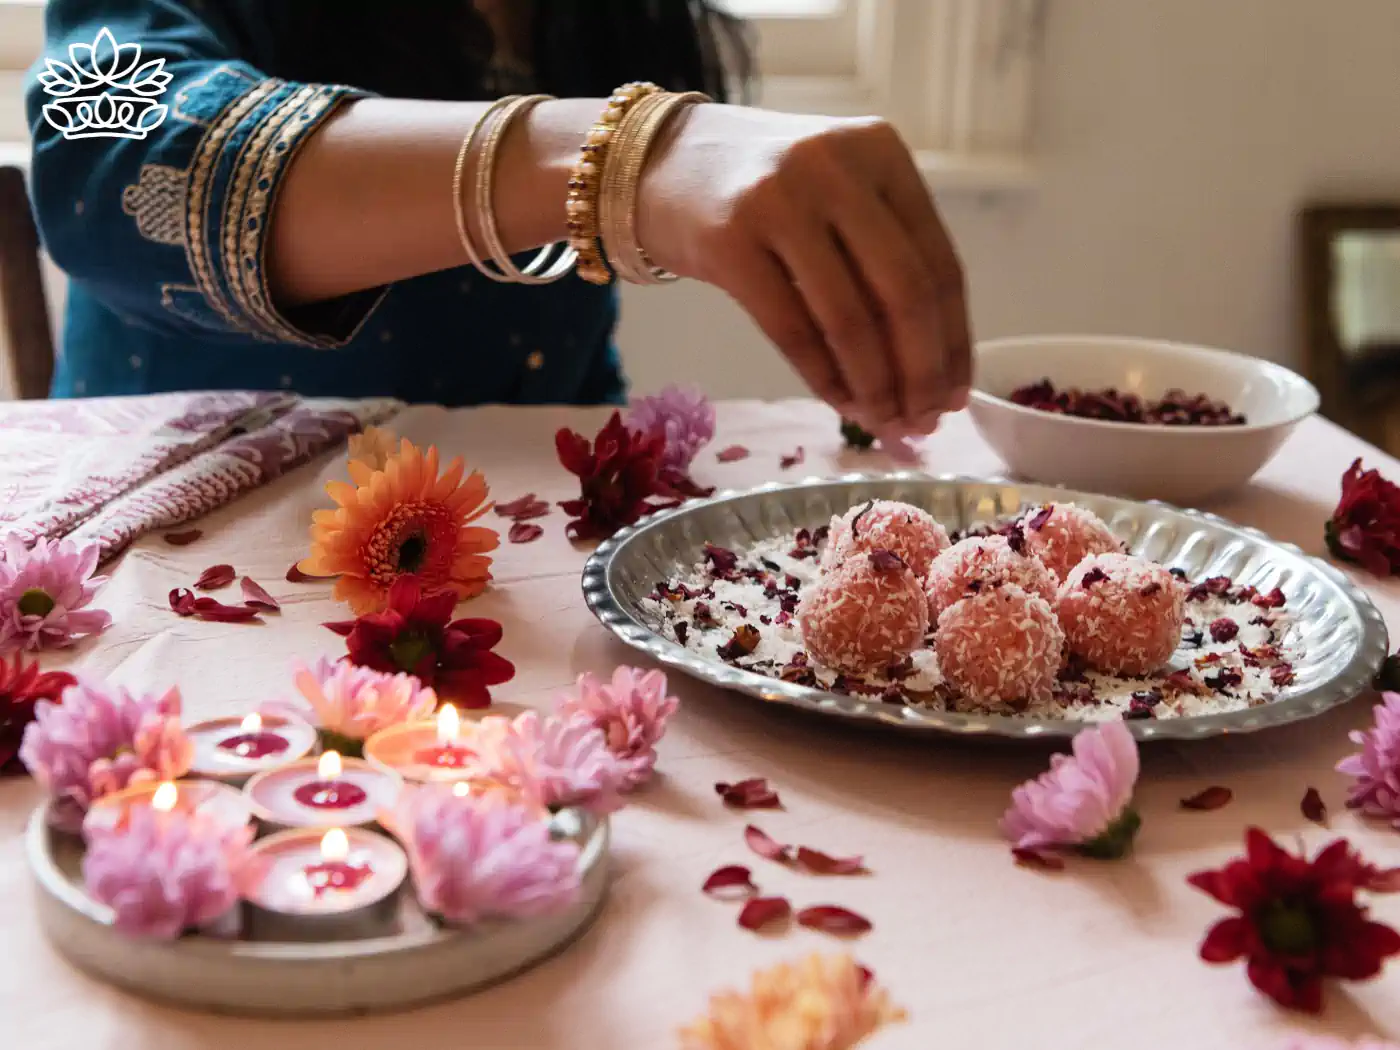 A woman in traditional attire preparing for Diwali by arranging a tray of coconut sweets and lighted tealight candles surrounded by fresh flowers on a decorated table. Fabulous Flowers and Gifts - Diwali Flowers. Delivered with Heart.